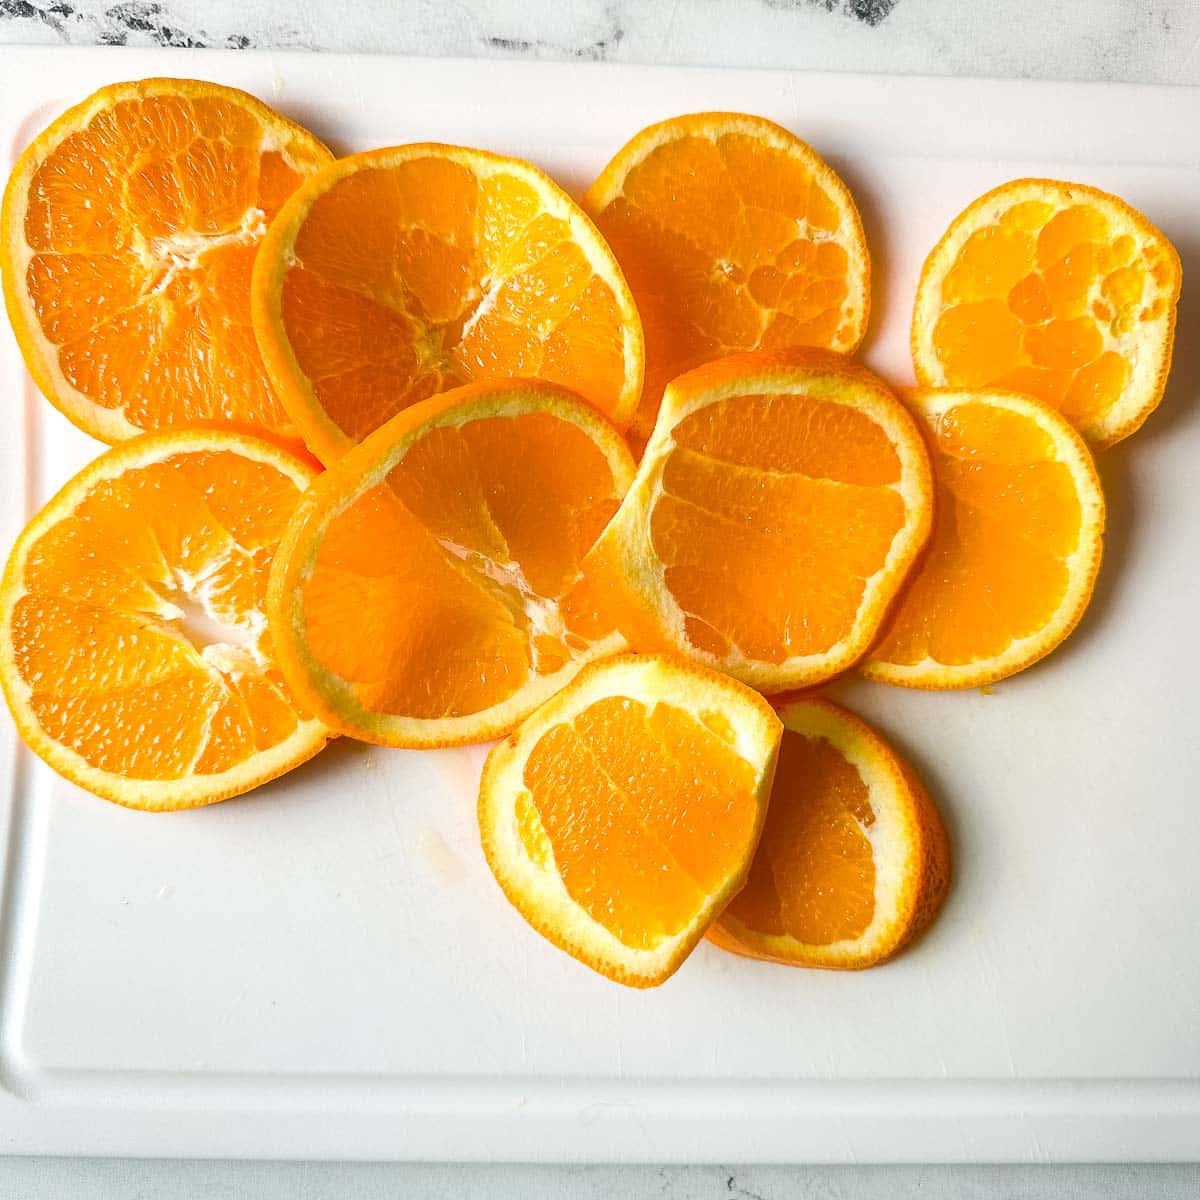 Sliced oranges on a white cutting board.